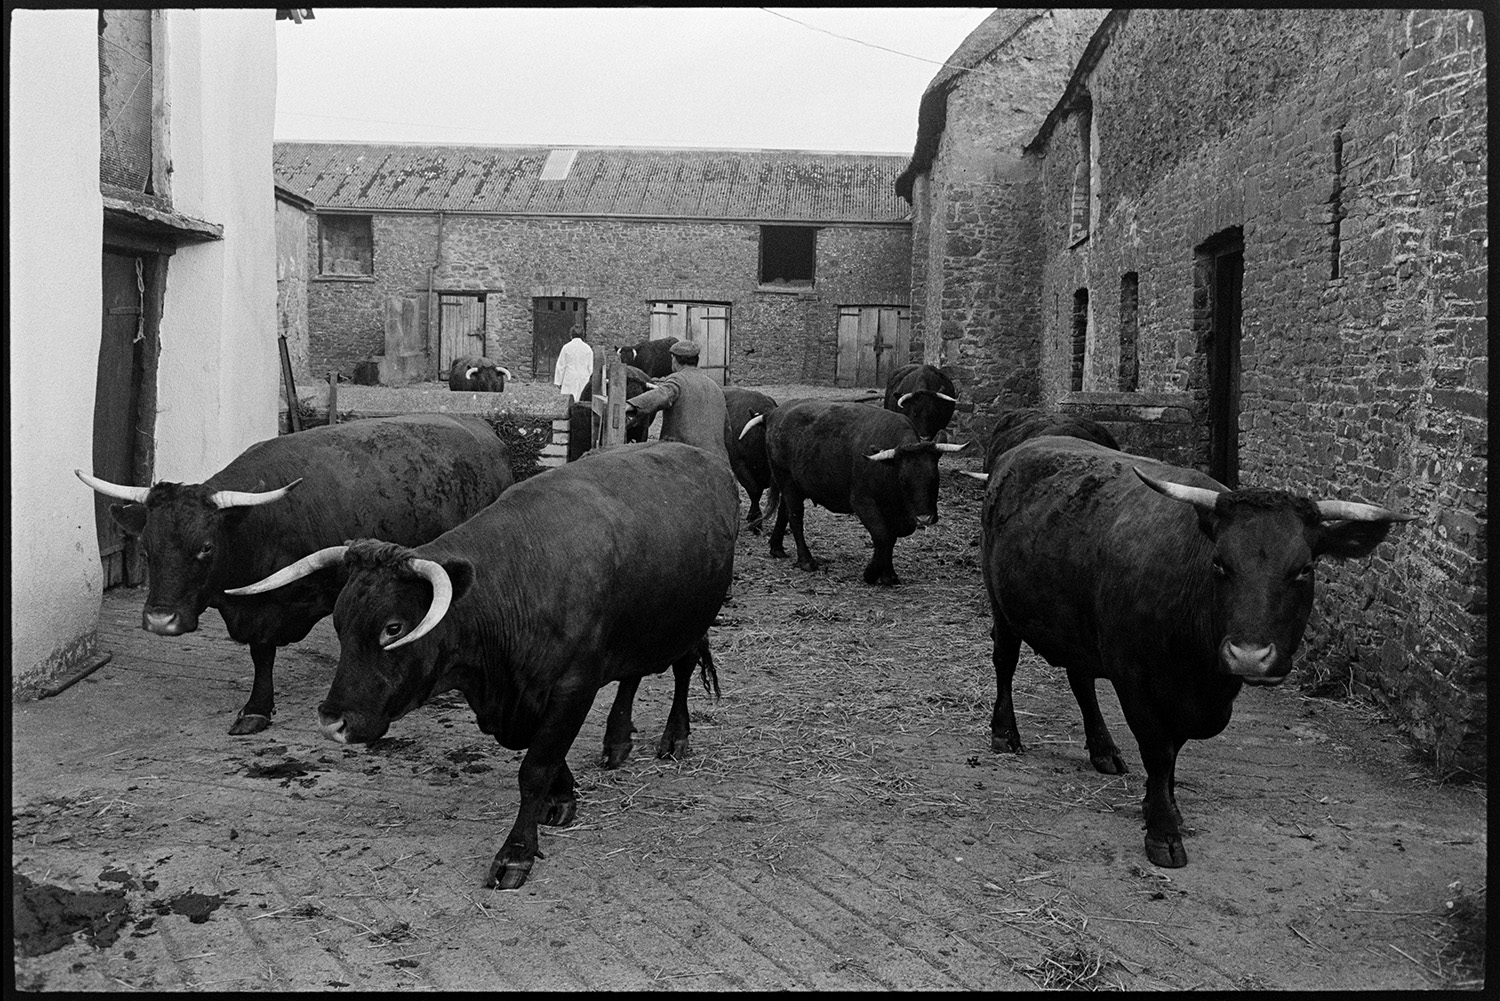 Horned Devon Red cows going from farm to fields.
[Members of the Elworthy family driving their horned Red Devon cows out of the farmyard at Narracott, Hollocombe to take them to pasture.]